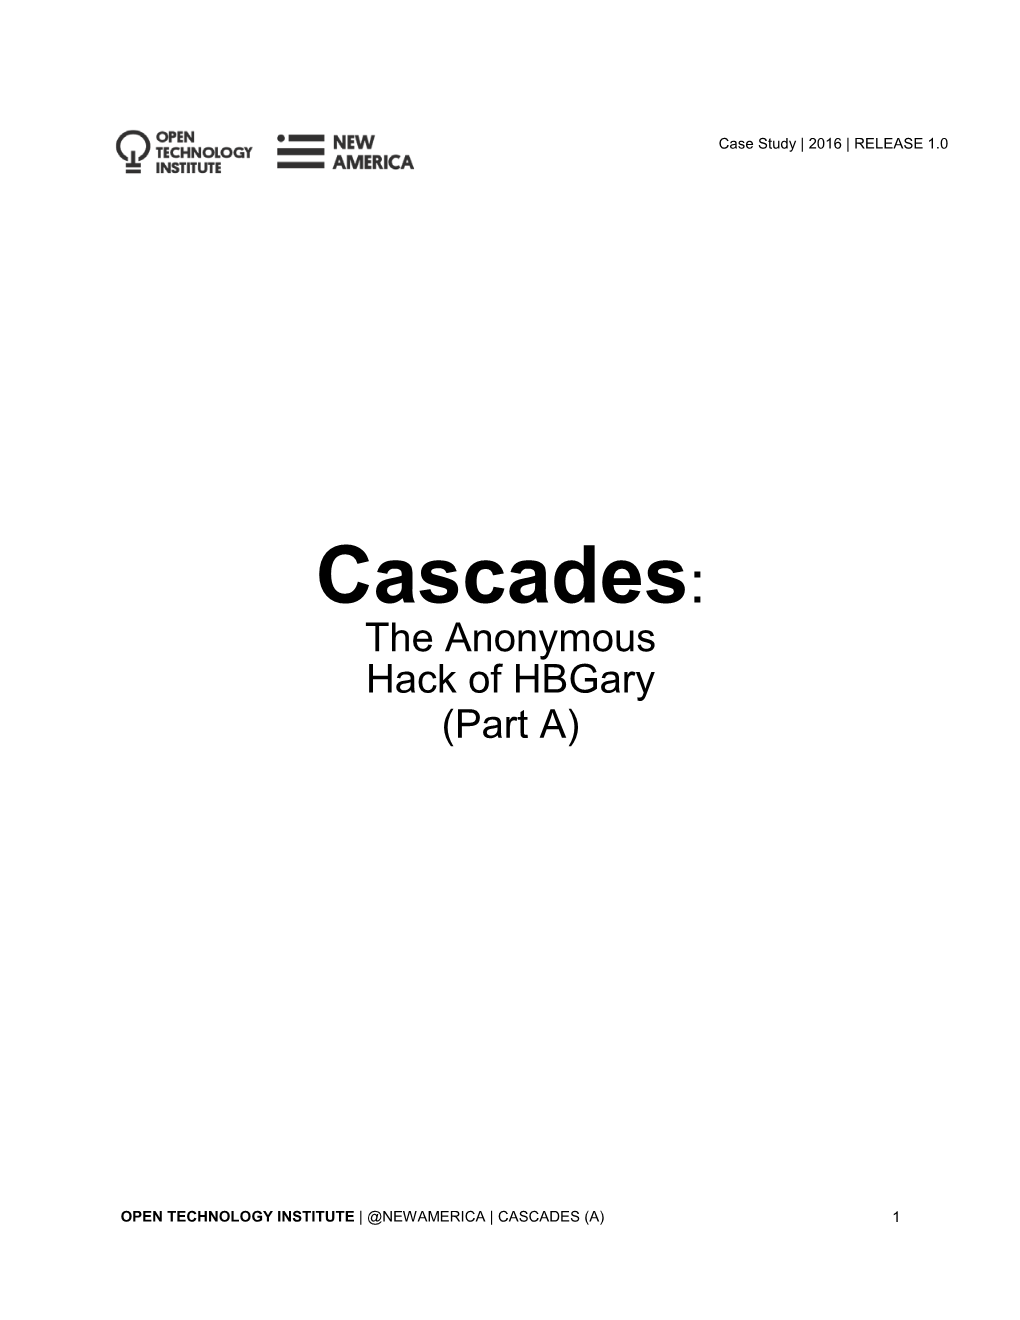 Cascades: the Anonymous Hack of Hbgary (Part A)